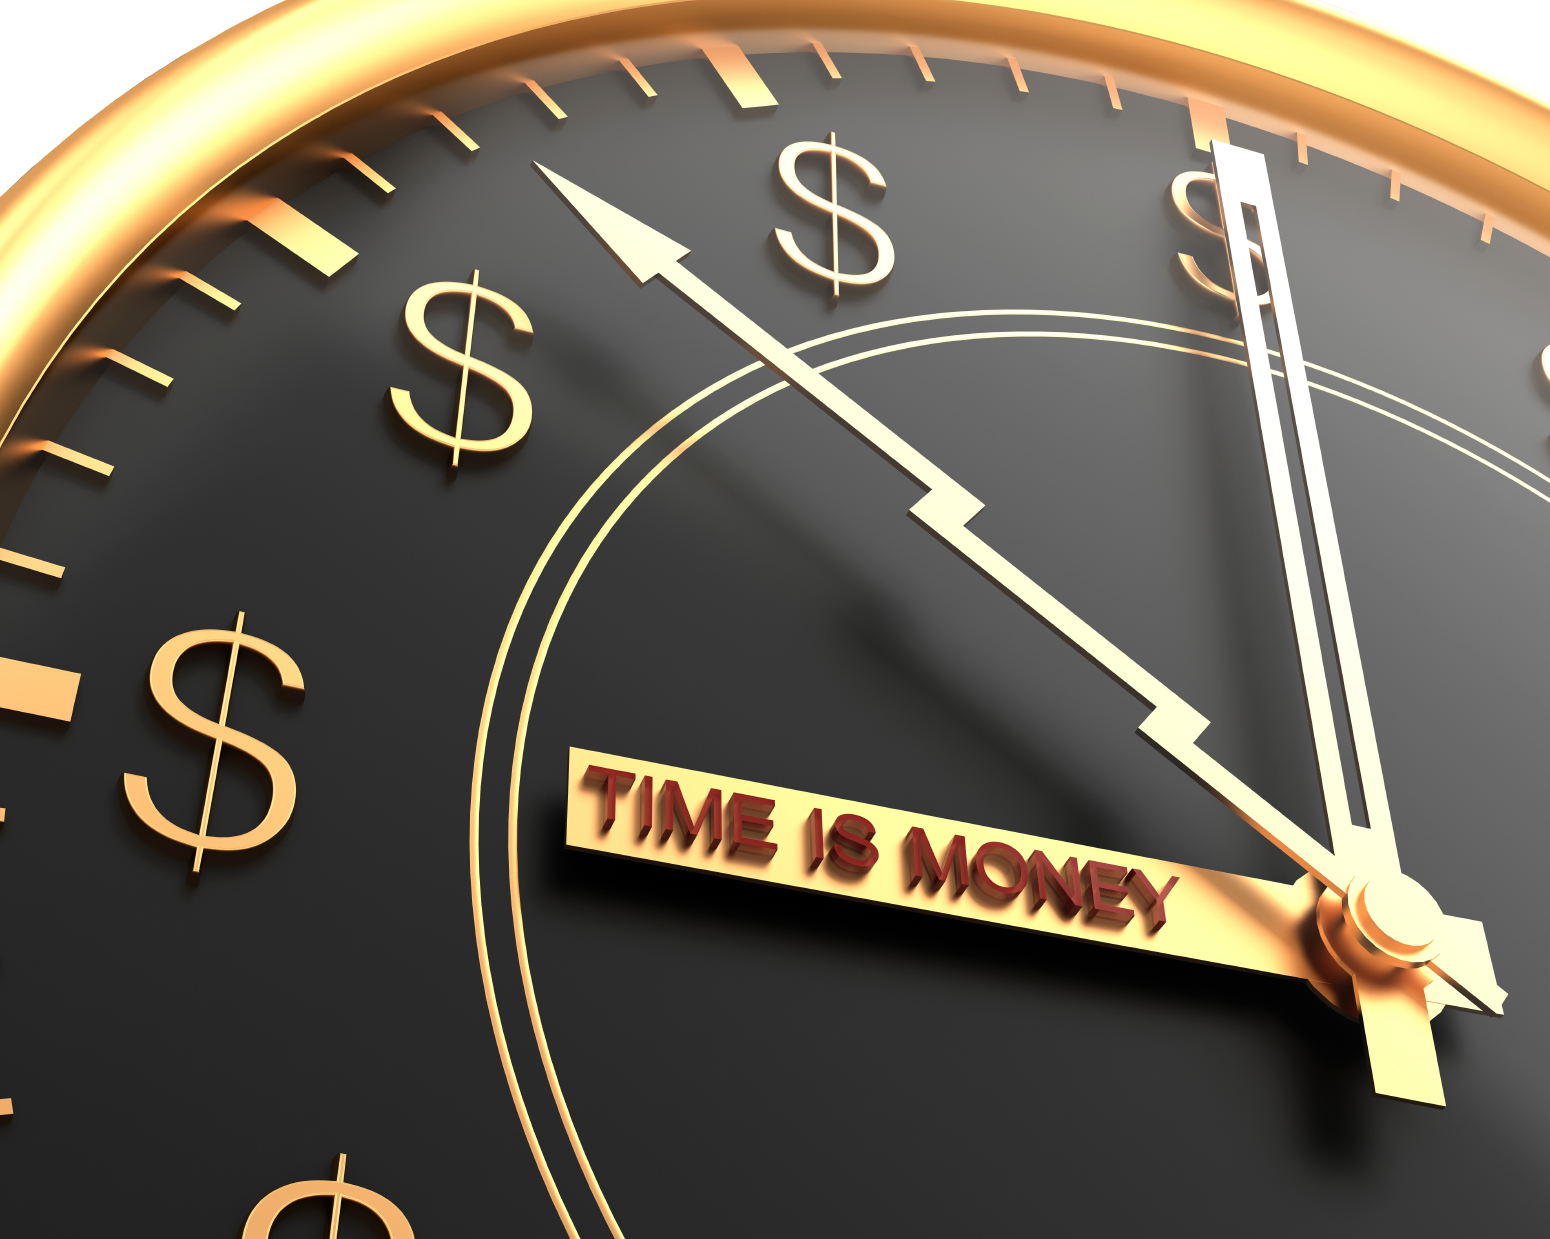 HD Time Is Money Wallpapers and Photos | HD Misc Wallpapers